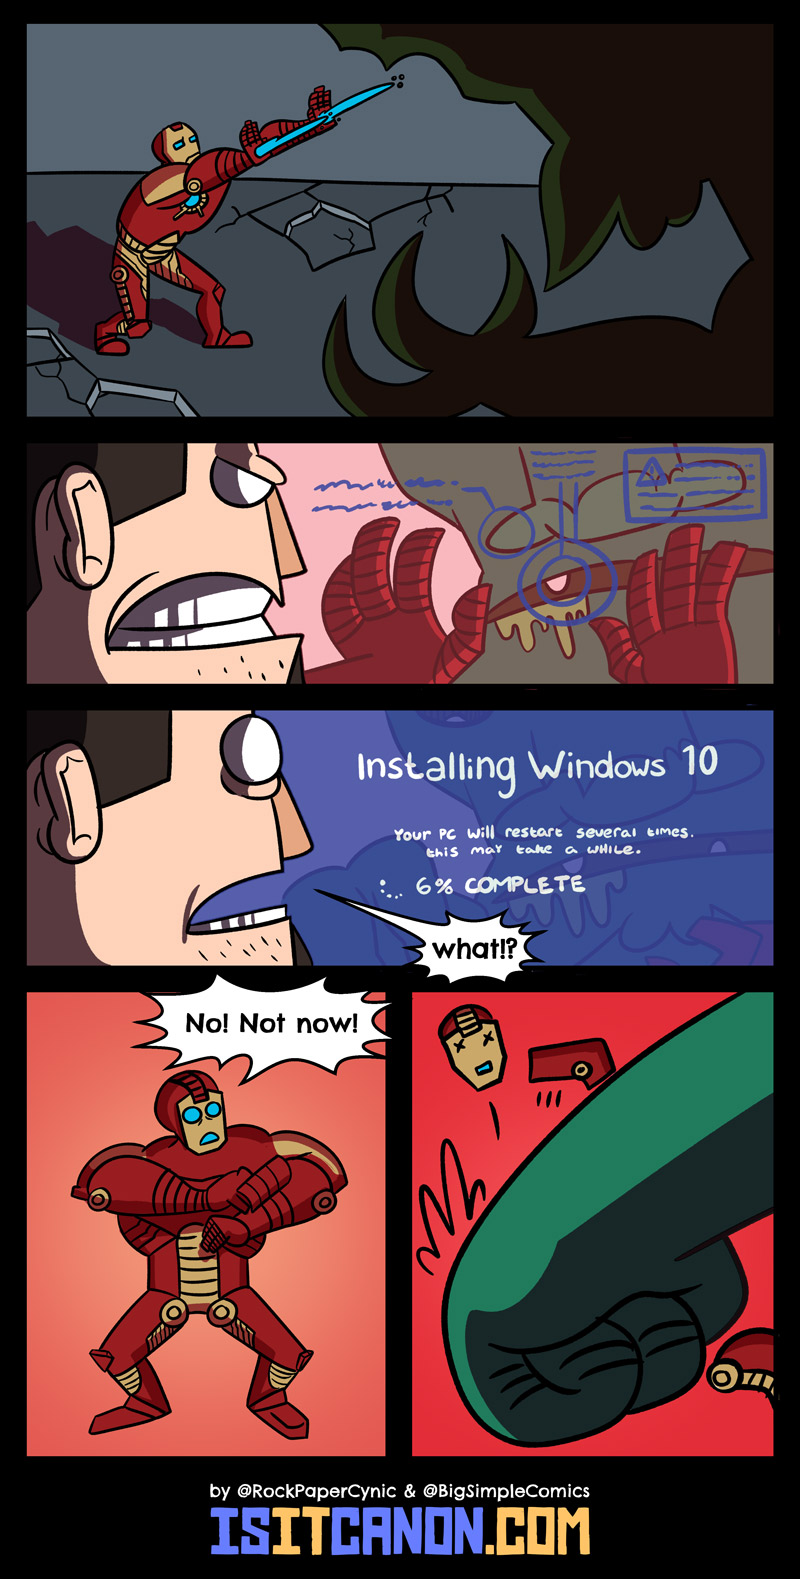 Iron Man is trying to save the planet but Windows 10 is all like HEY IS THIS A GOOD TIME TO UPDATE?